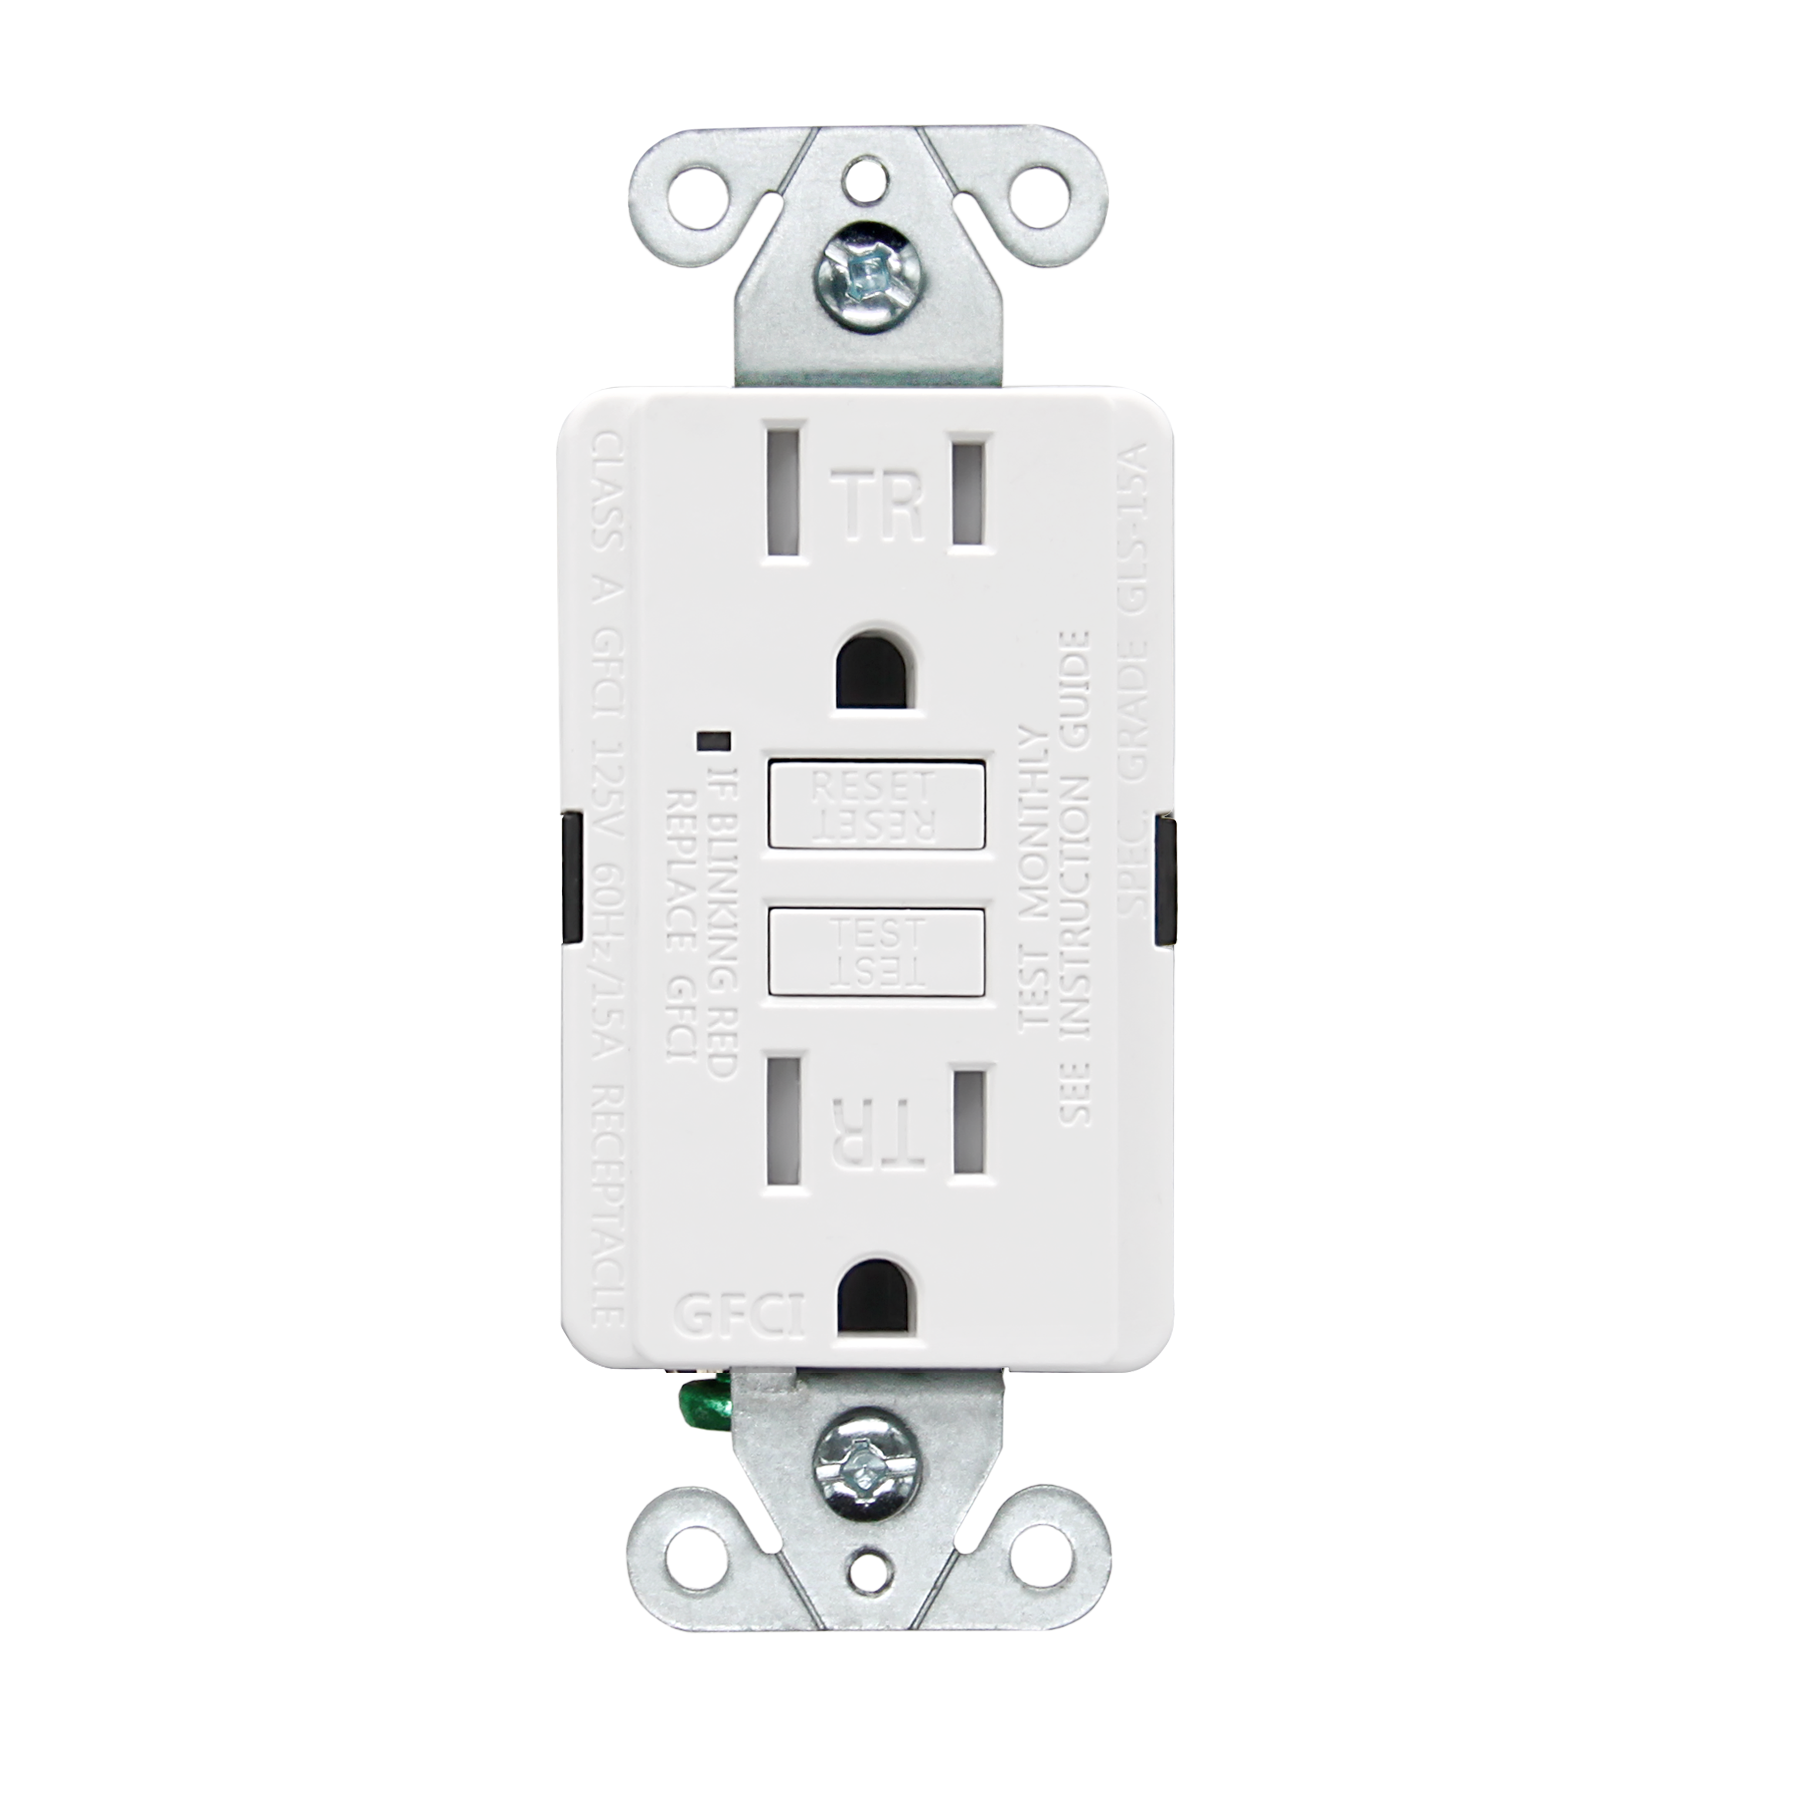 Faith UL Listed America 15A Electrical High Quality Duplex GFCI Tamper Resistant Receptacles